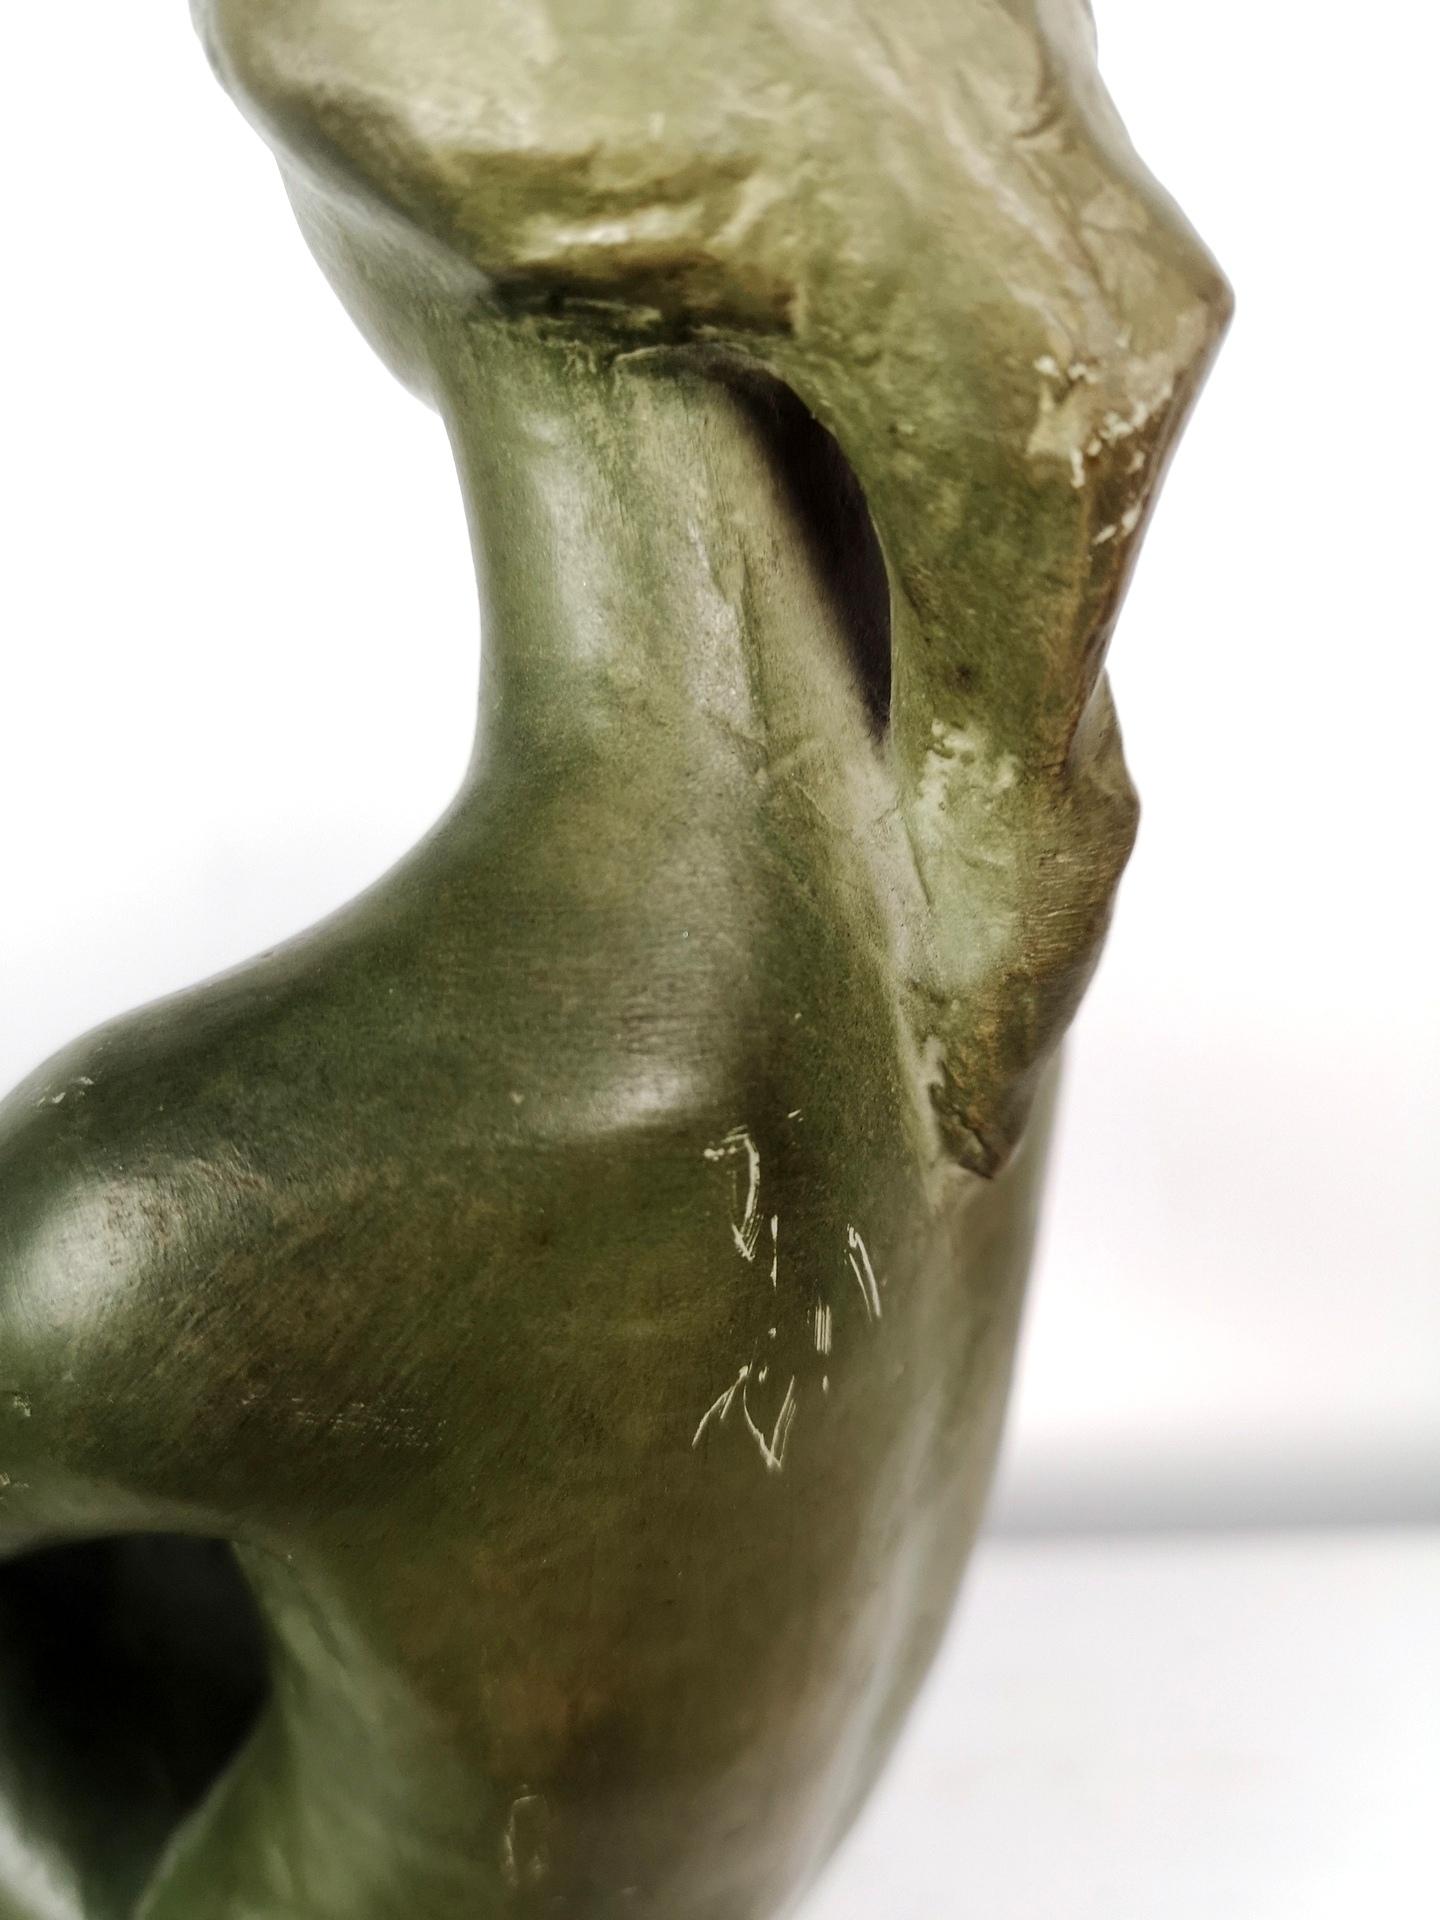 Sitting Nude Terracota Ceramic Sculpture by Somogyi, 1960s For Sale 1